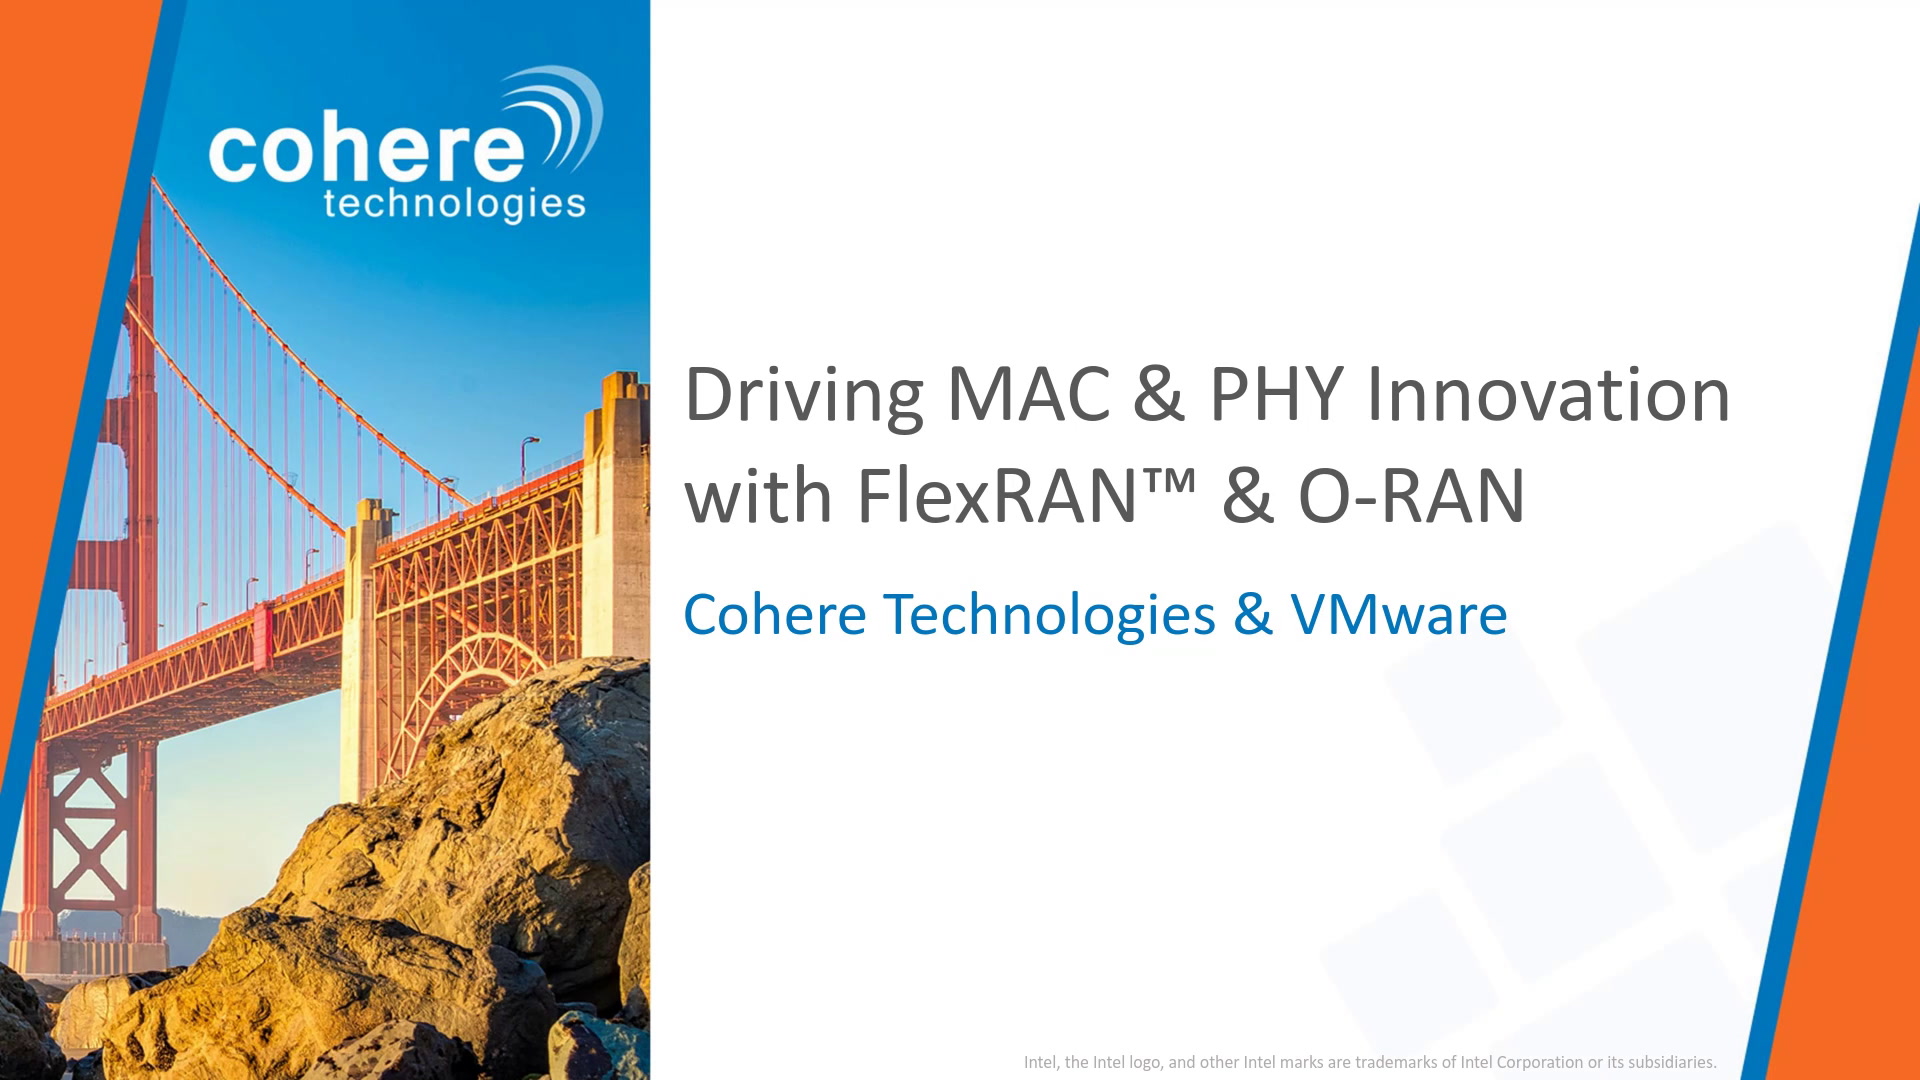 Driving MAC & PHY Innovation with FlexRAN™ and O-RAN